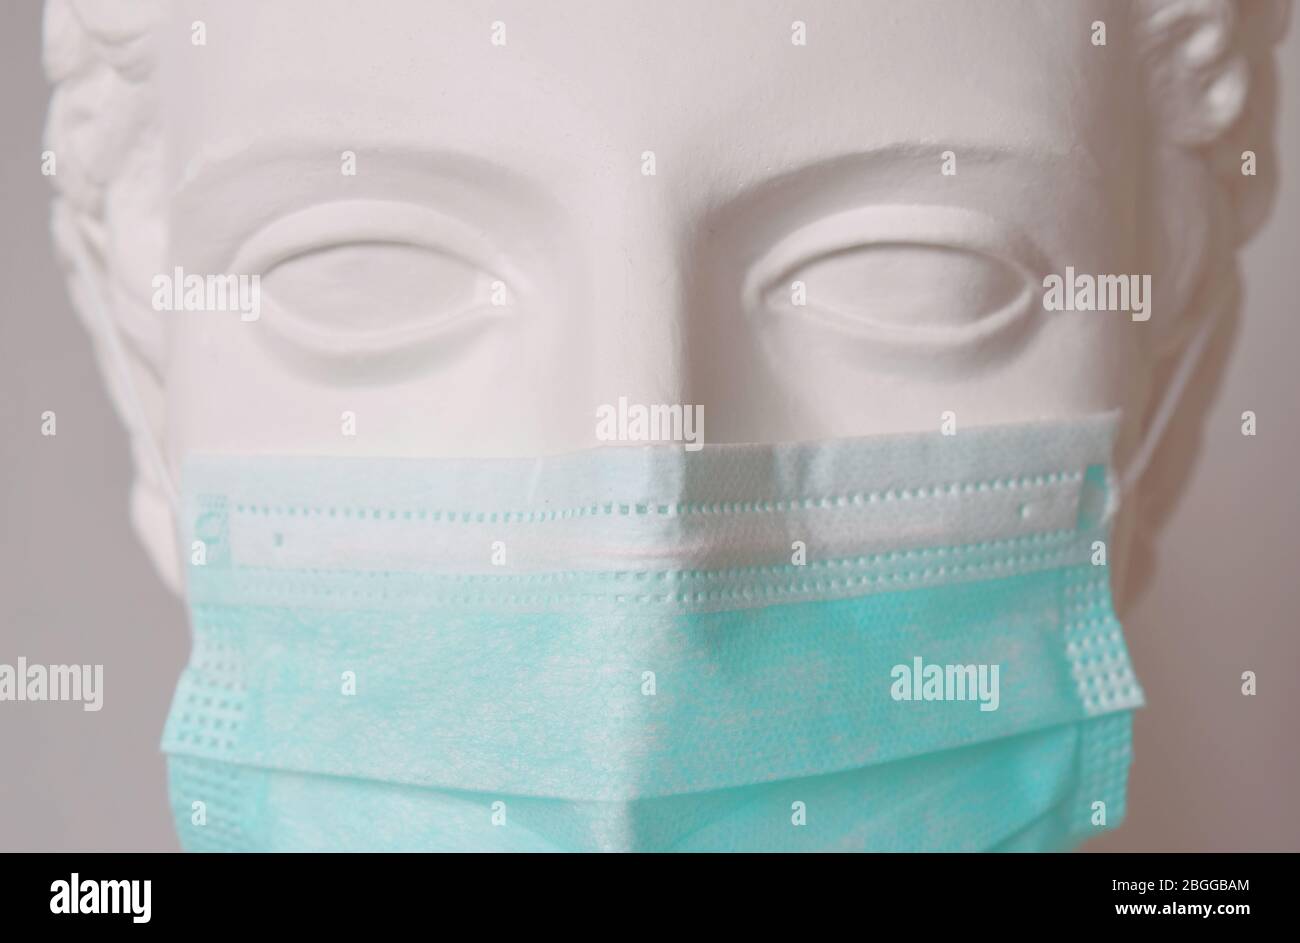 Face with mask. wearing protection face mask against viruses. Coronavirus pandemia protection. Close up view. Stock Photo